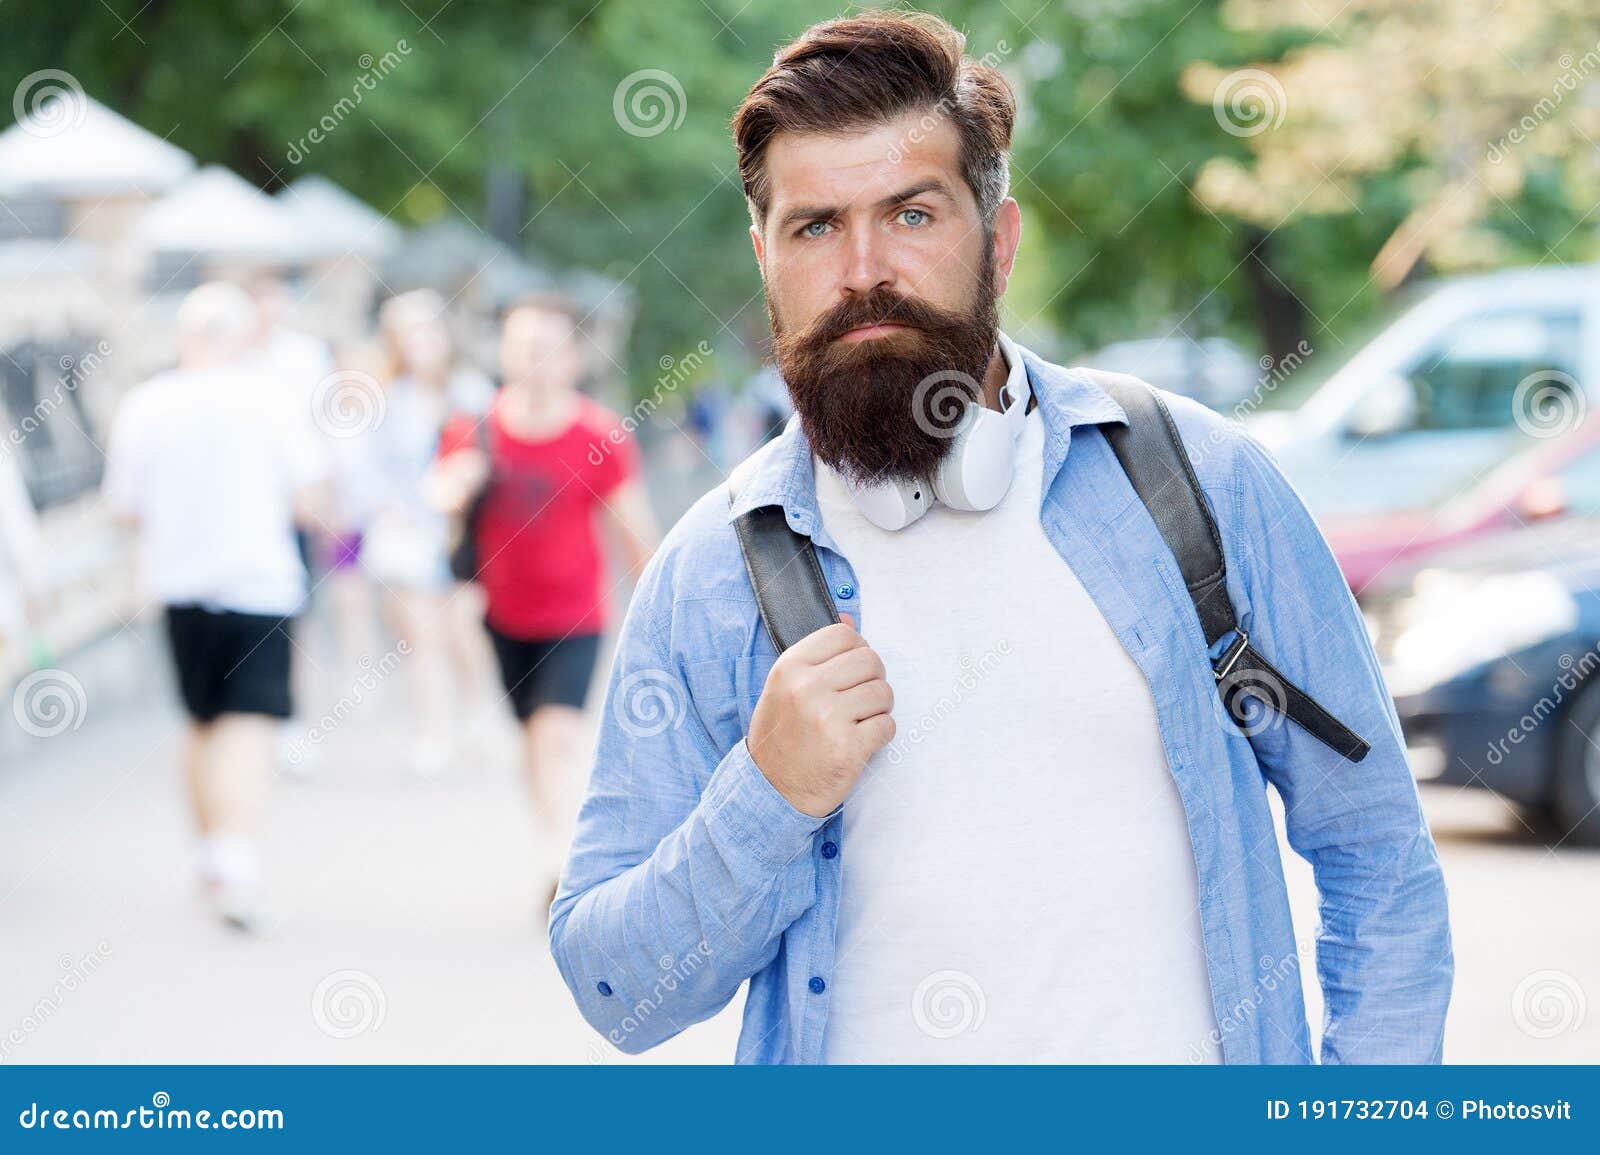 Its casual enough. Hipster in casual style urban outdoors. Bearded